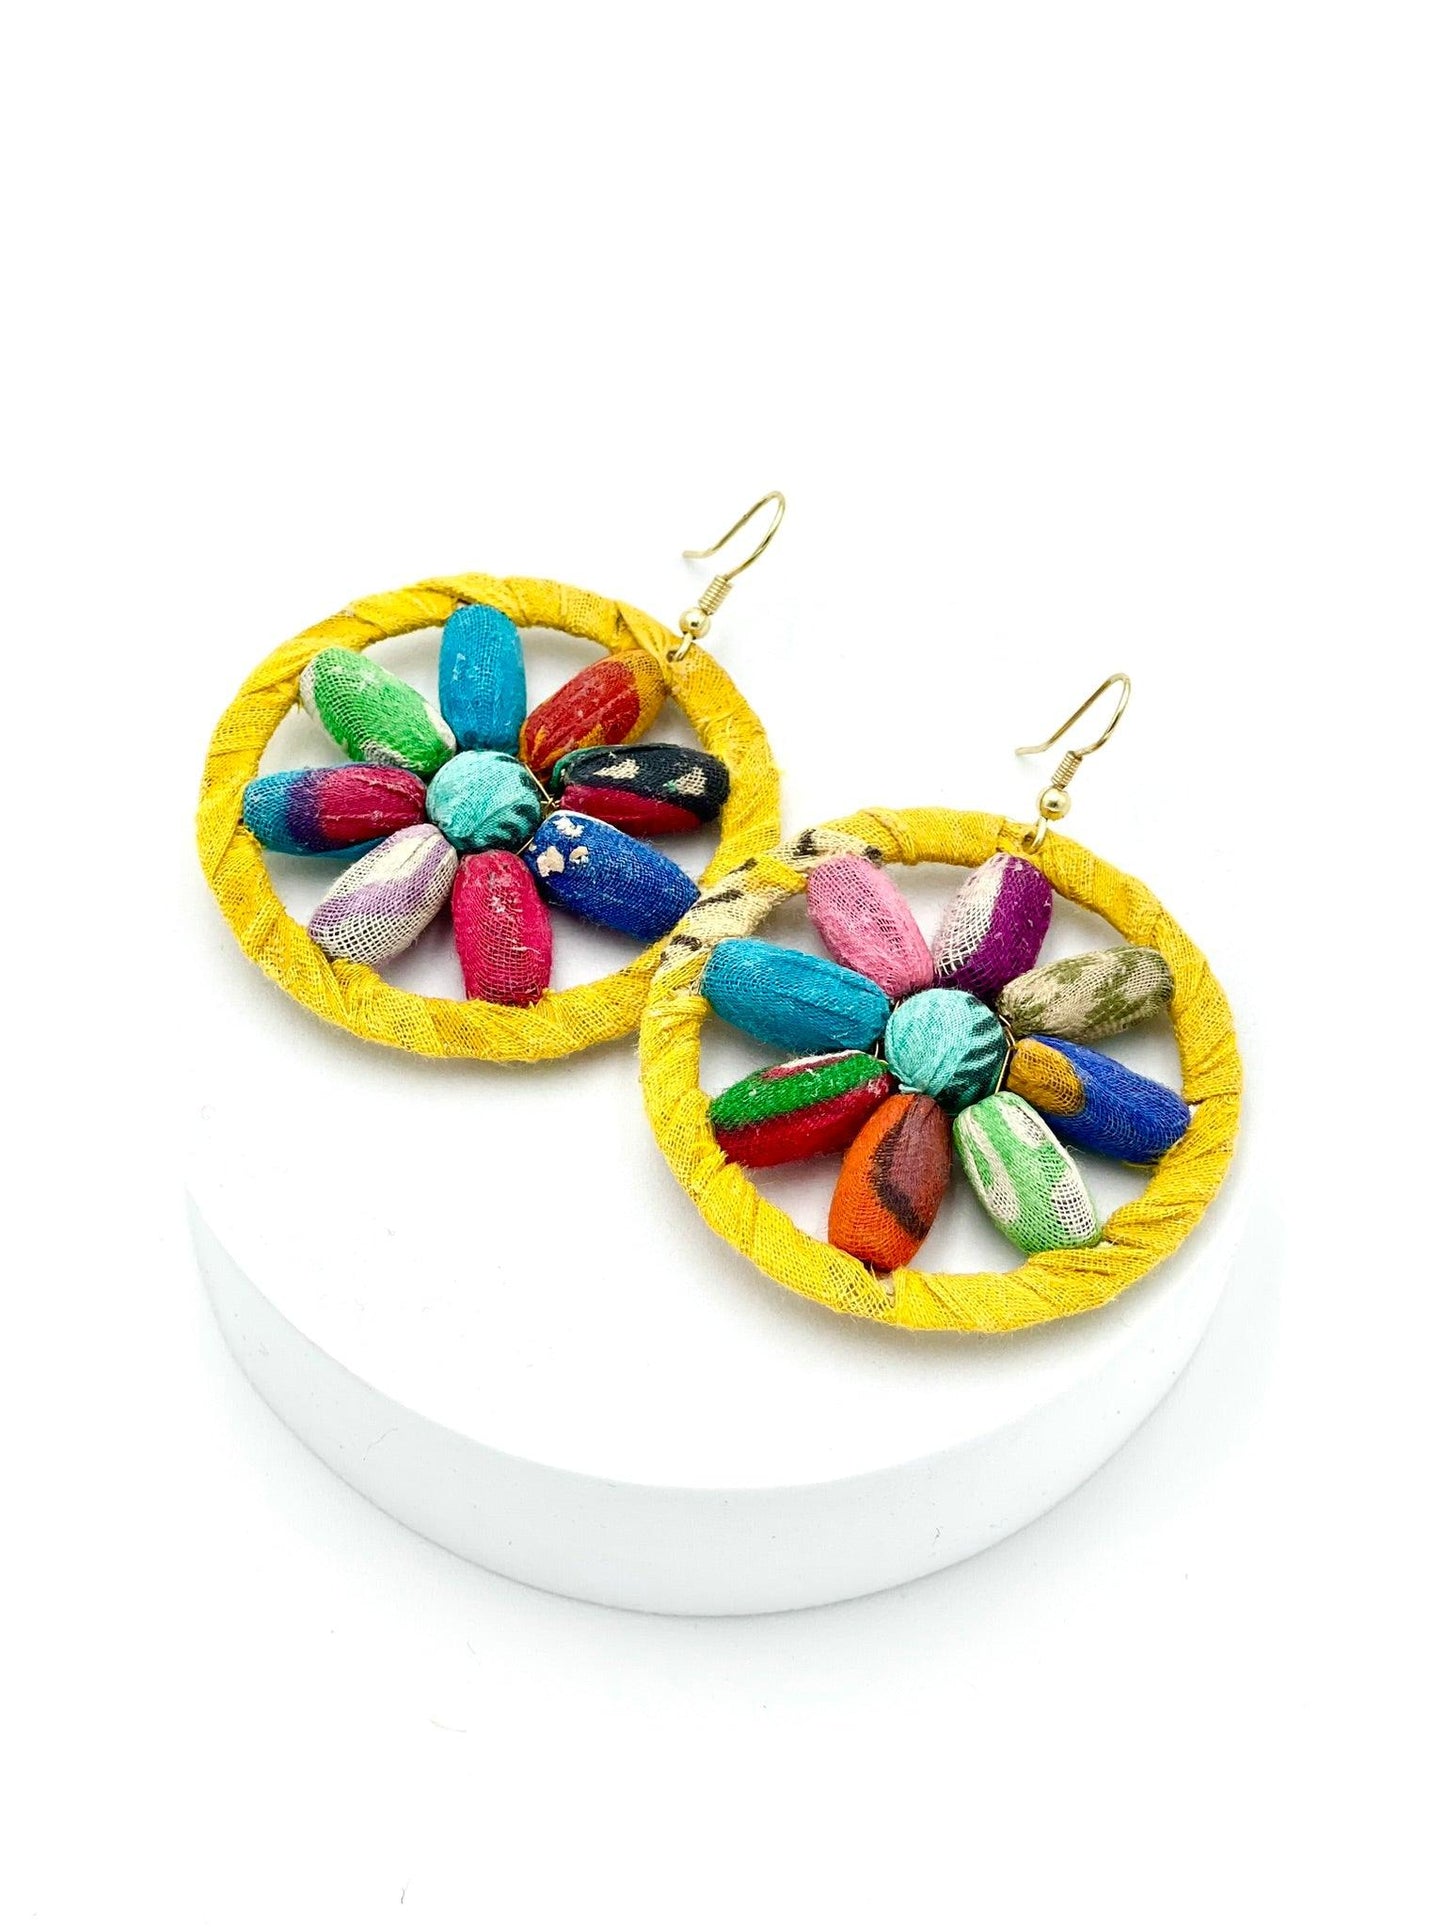 Fair Trade, Hoops/Earrings with Upcycled Cotton Fabric - Transcend